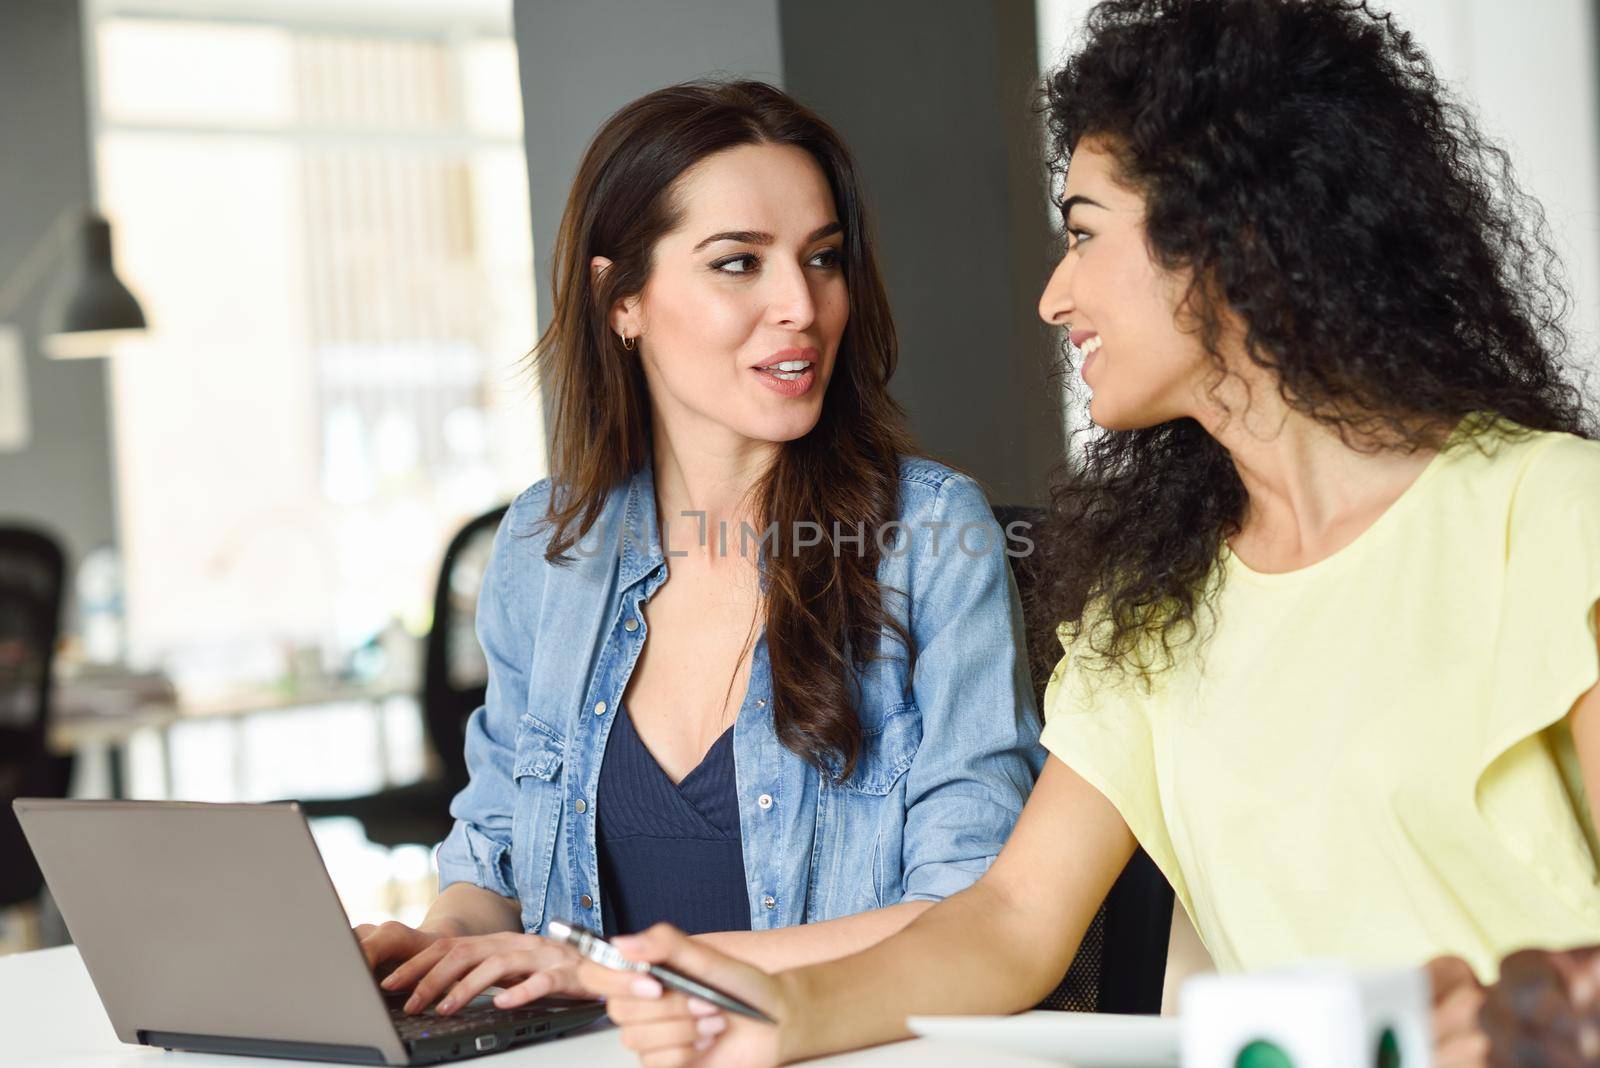 Two young women studying with a laptop computer on white desk. Beautiful girls working toghether wearing casual clothes.